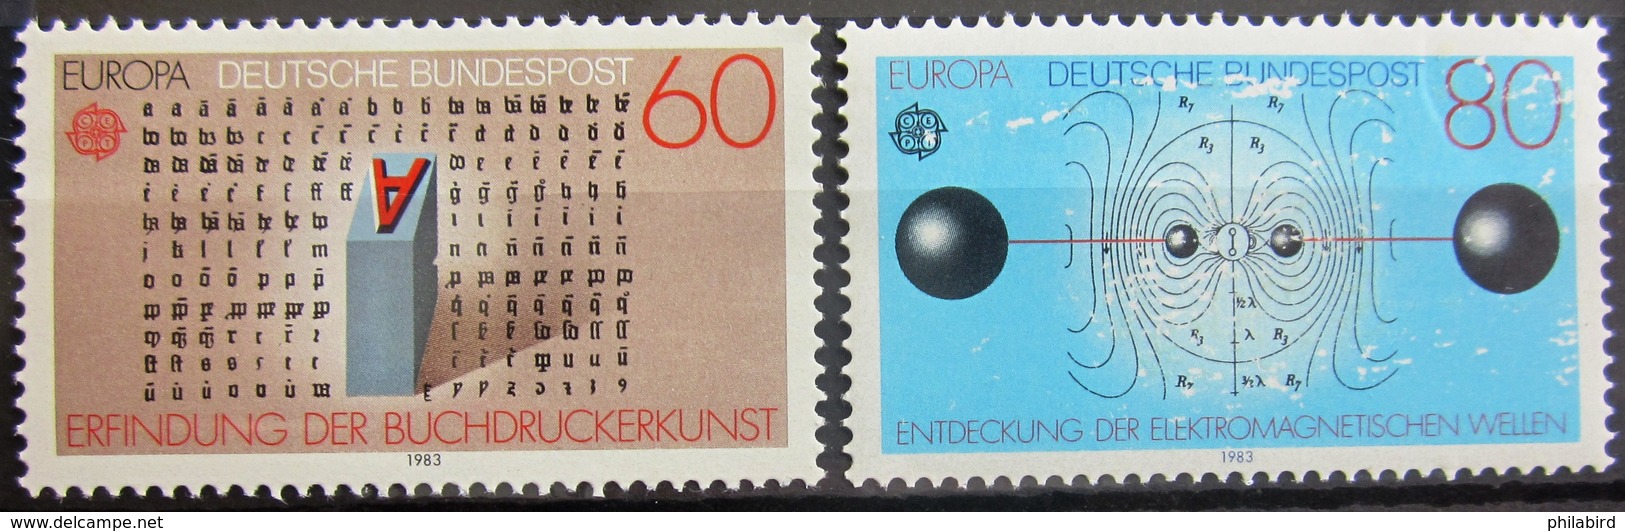 EUROPA            Année 1983         ALLEMAGNE          N° 1007/1008            NEUF** - 1983